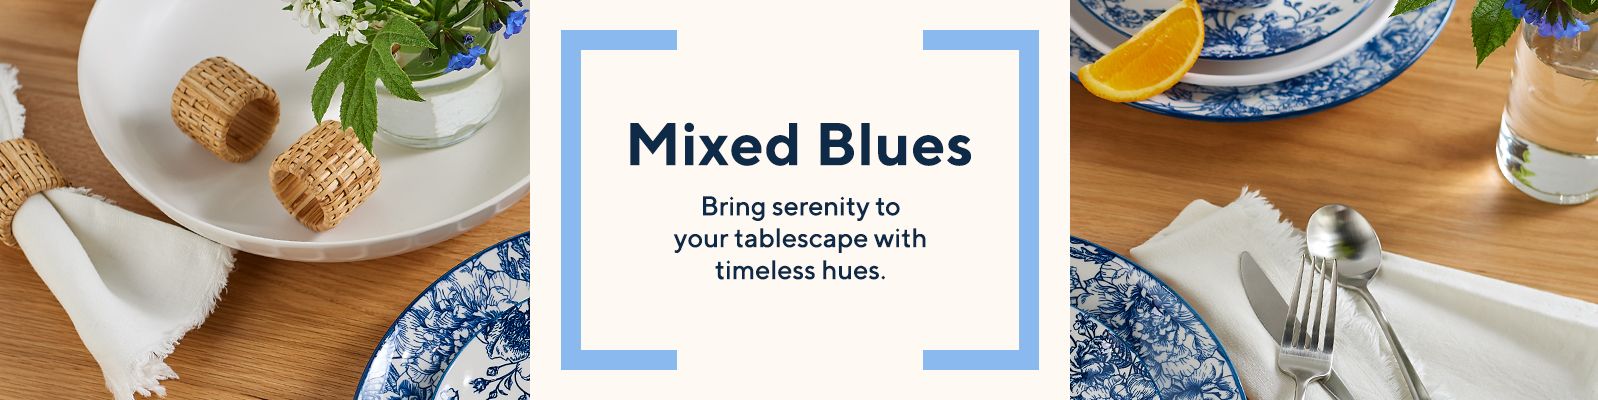 Mixed Blues. Bring serenity to your tablescape with timeless hues.